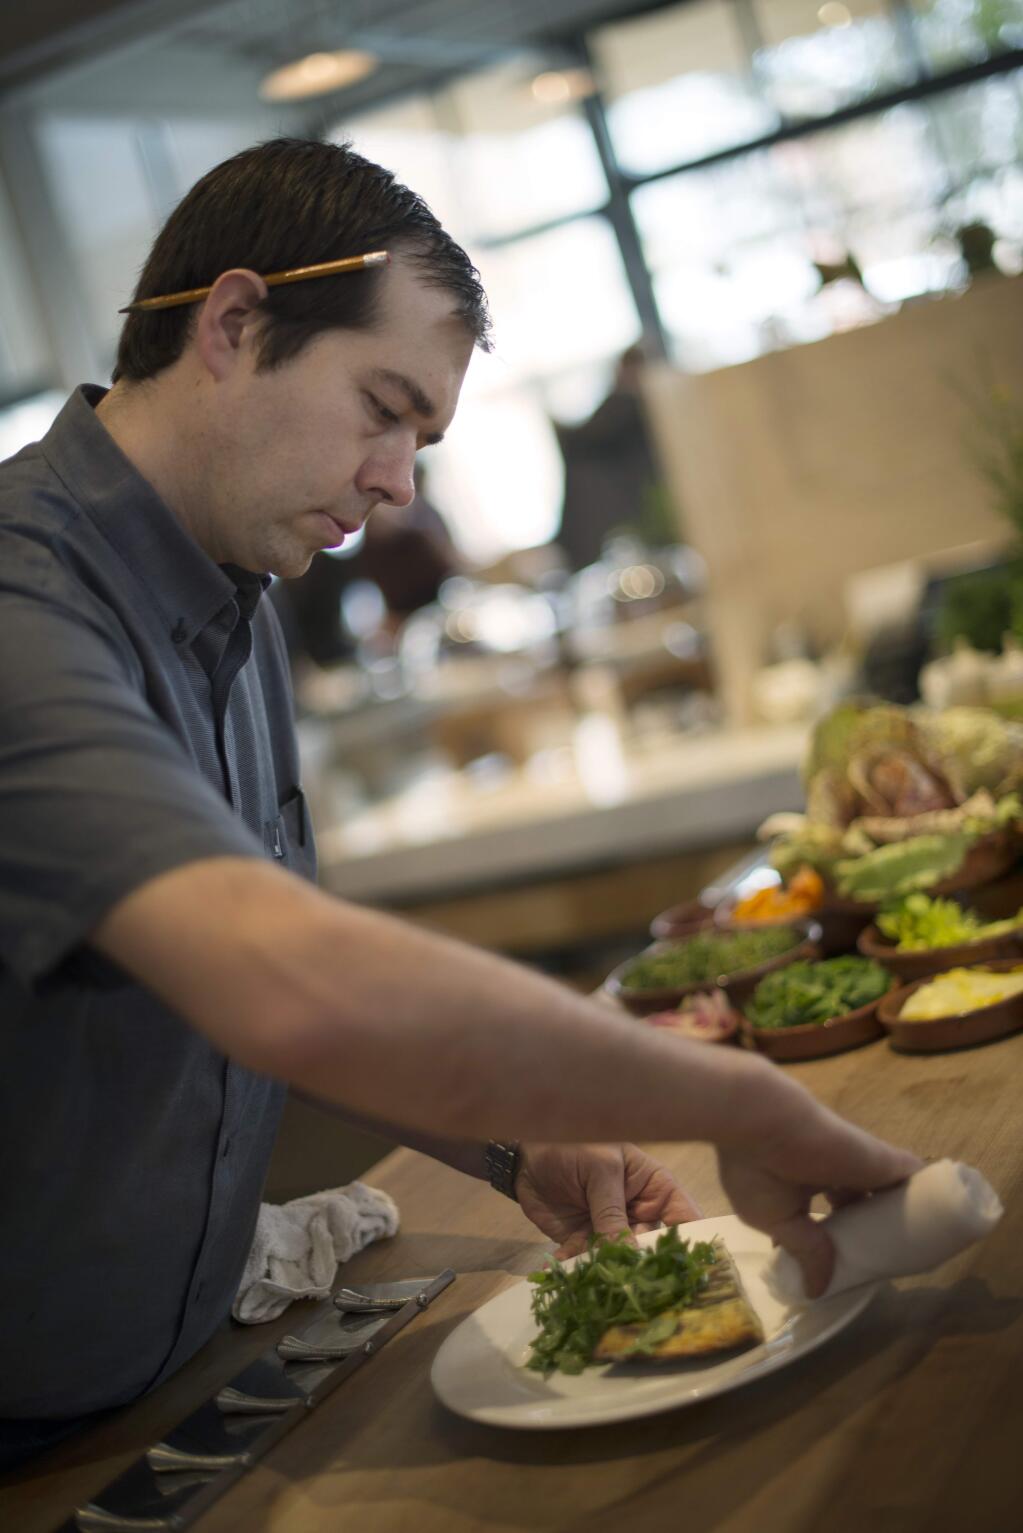 Chef Perry Hoffman making final touches to dishes before they head out to the dining area during a Saturday brunch at SHED in Healdsburg. January 16, 2016. (Photo: Erik Castro/for Sonoma Magazine)